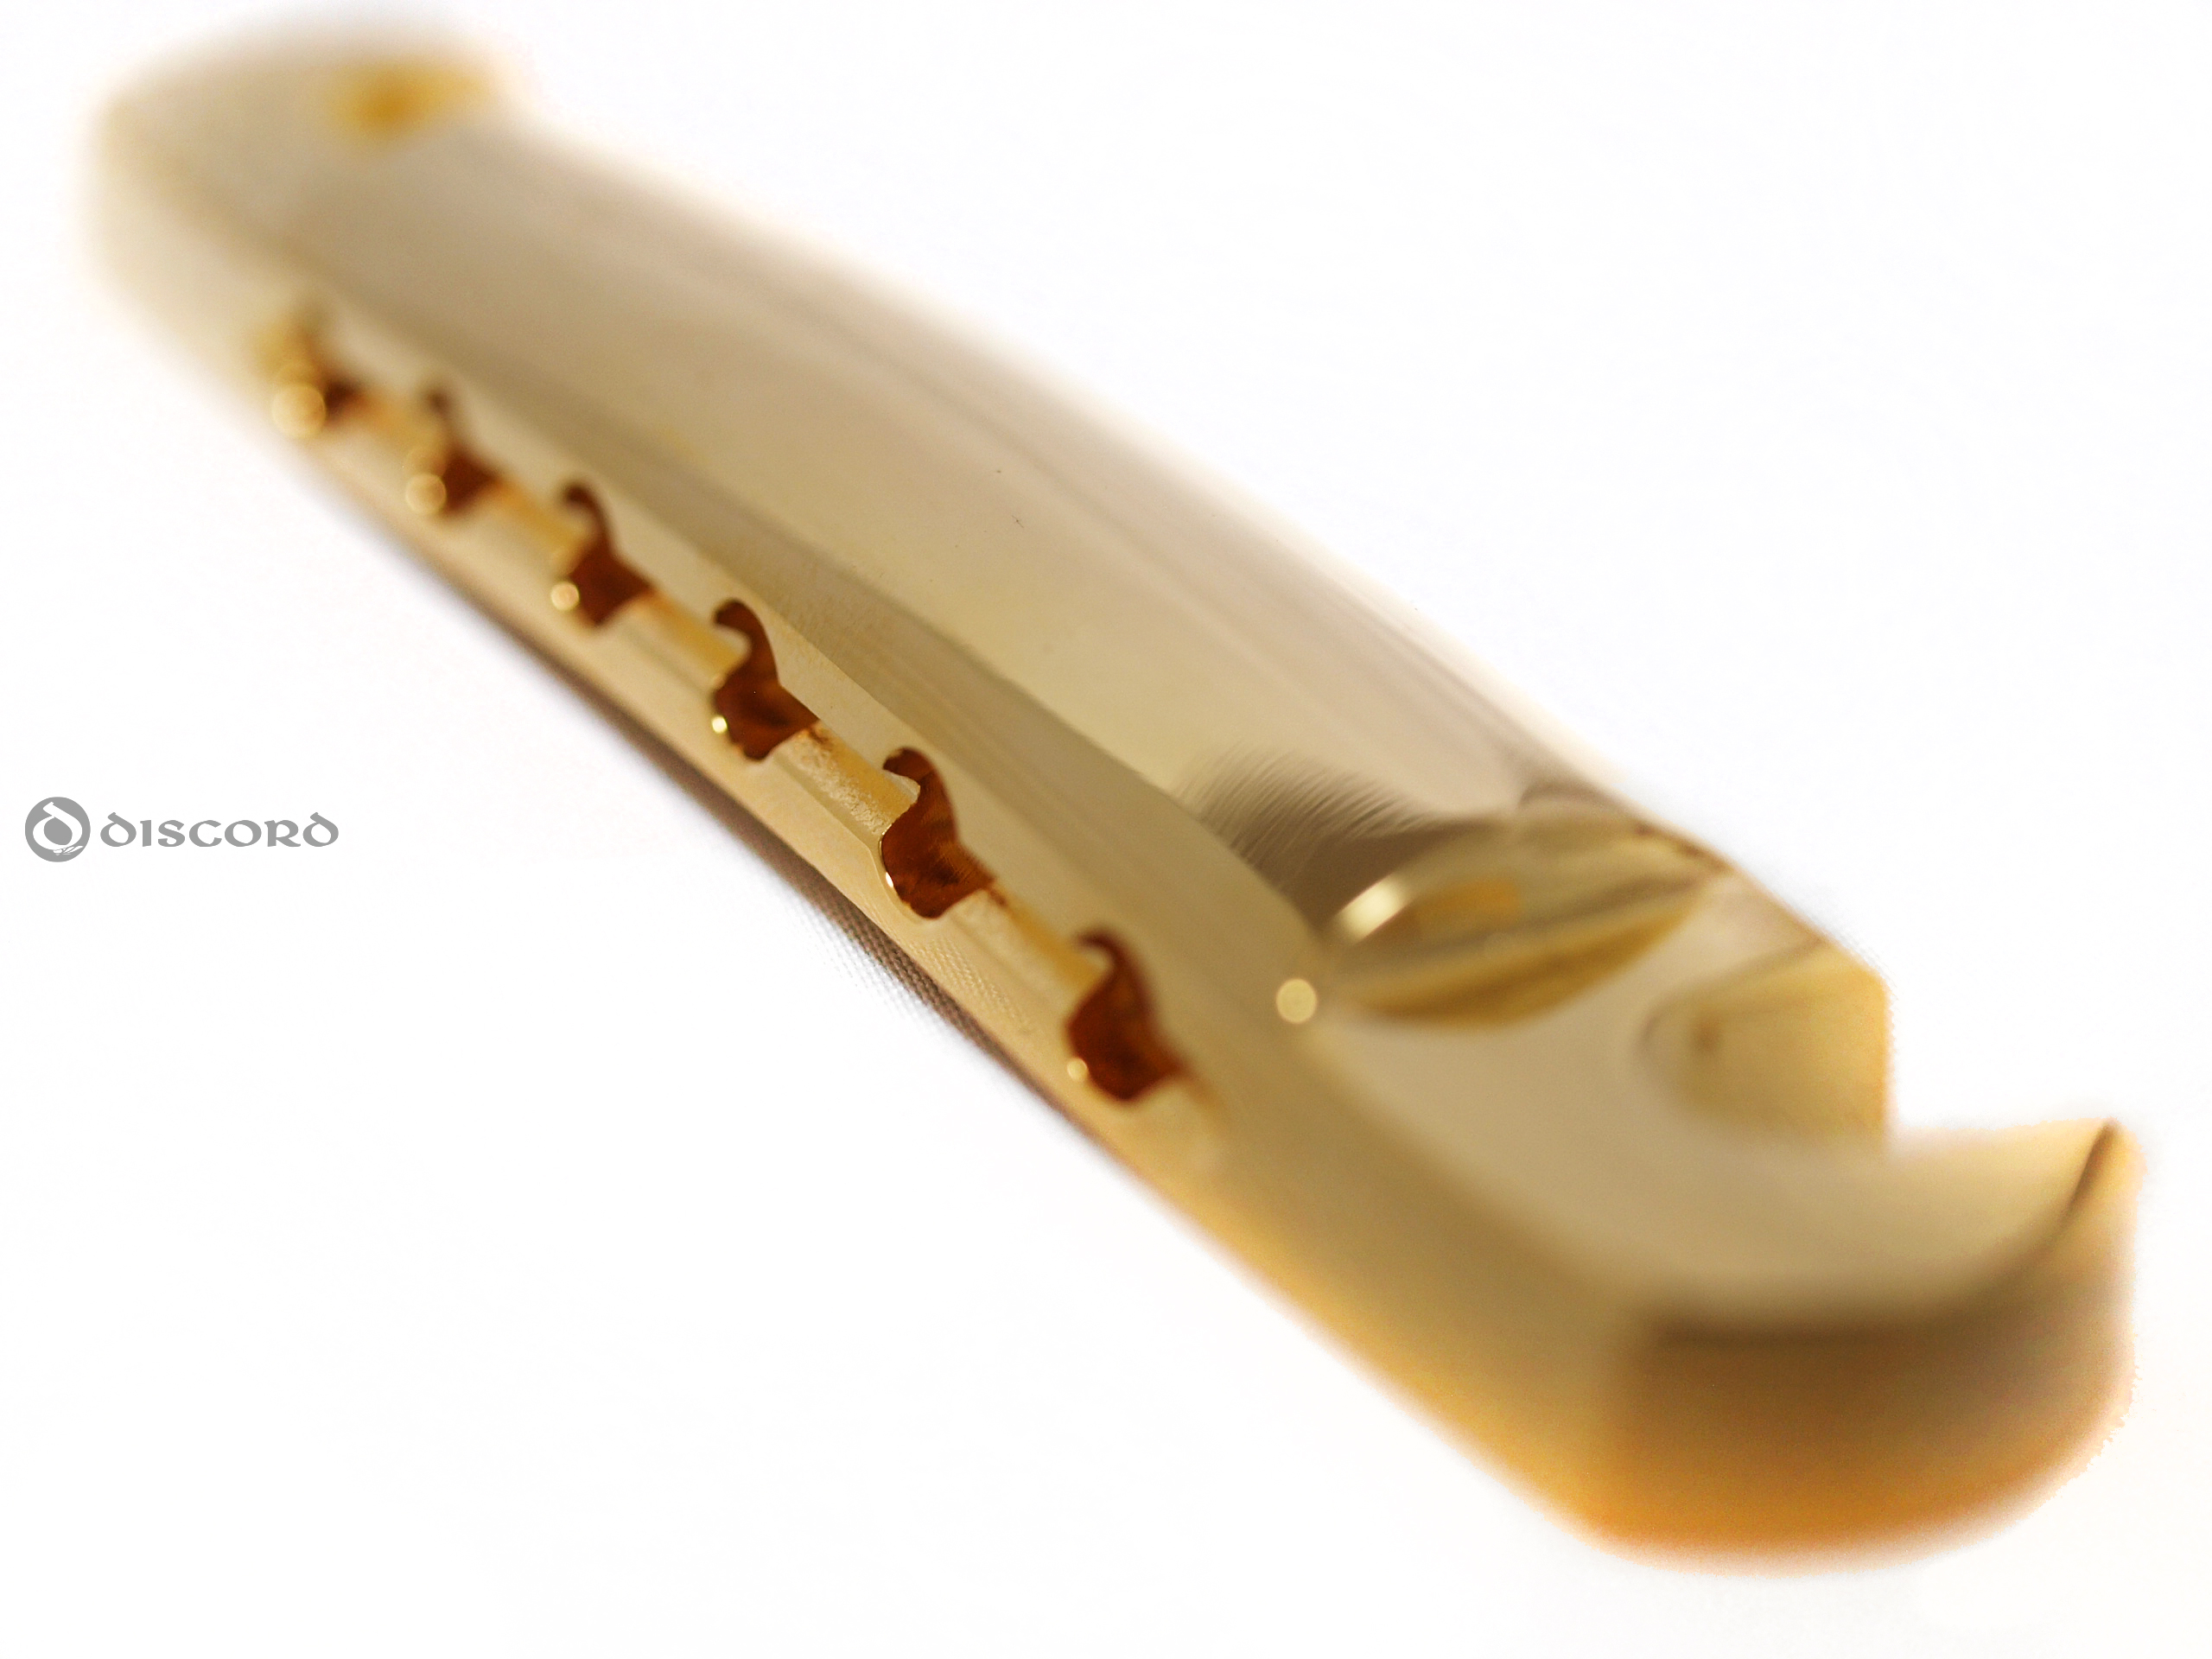 DISCORD 60's STYLE ALUMINIUM TAILPIECE GOLD manufacturer page 